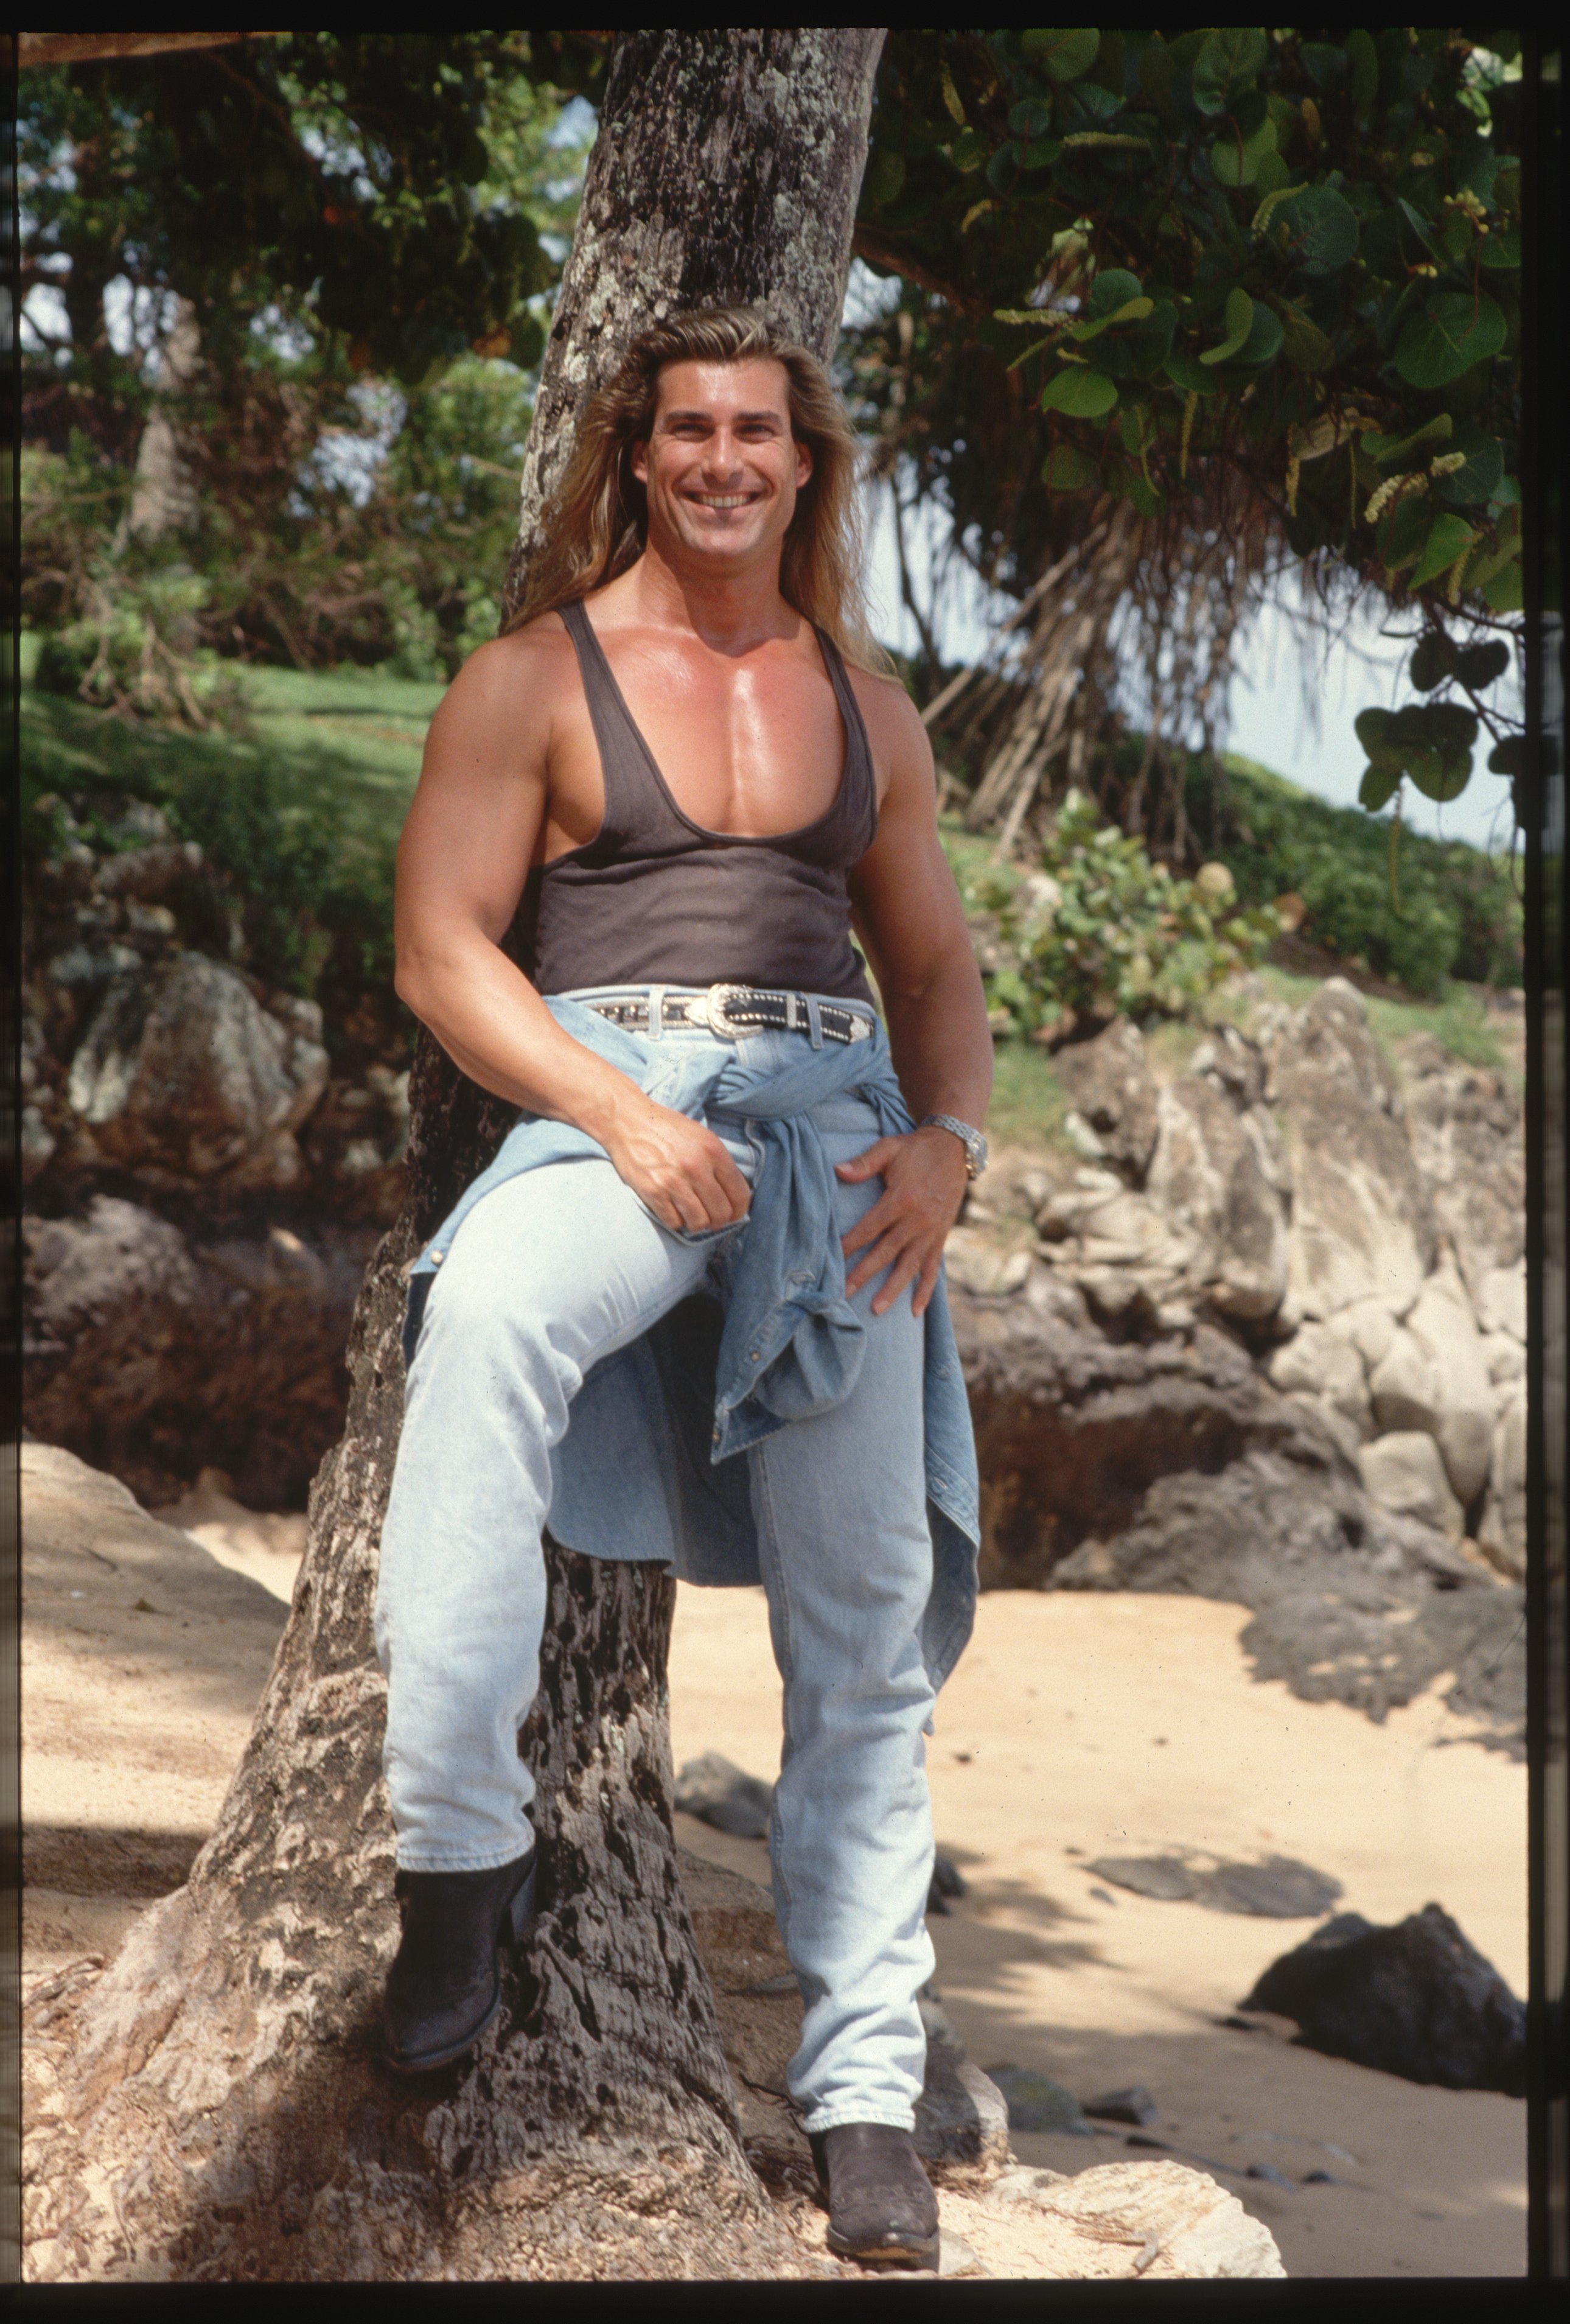 Fabio Lanzoni is pictured wearing a tank top and jeans leaning against a tree in Hawaii (date not specified) |  Source: Getty Images